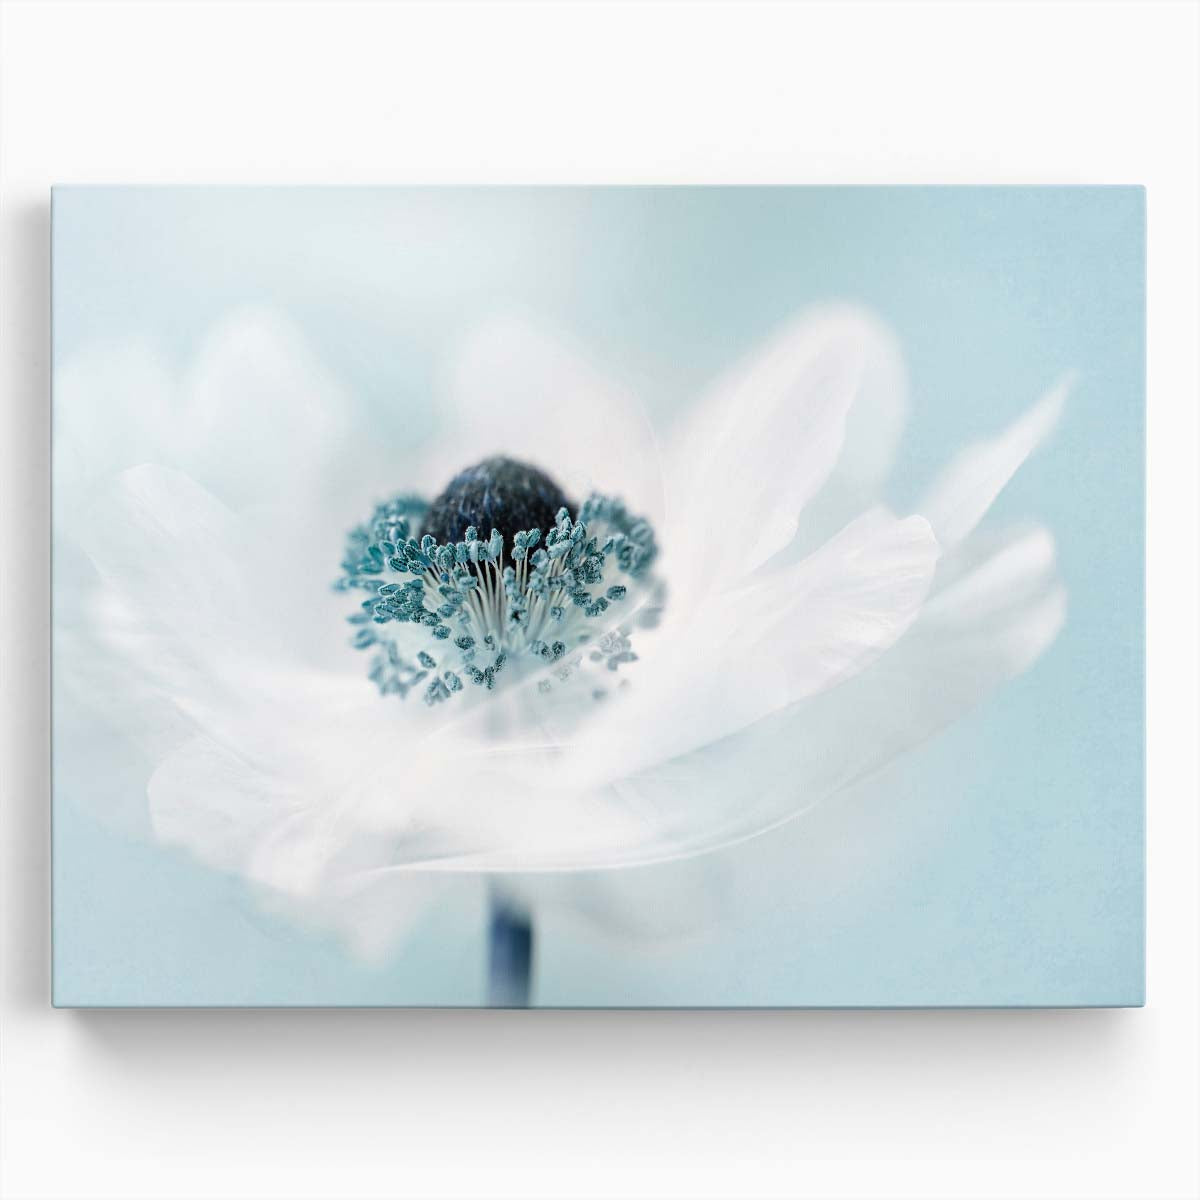 Turquoise Teal Floral Macro Abstraction Wall Art by Luxuriance Designs. Made in USA.